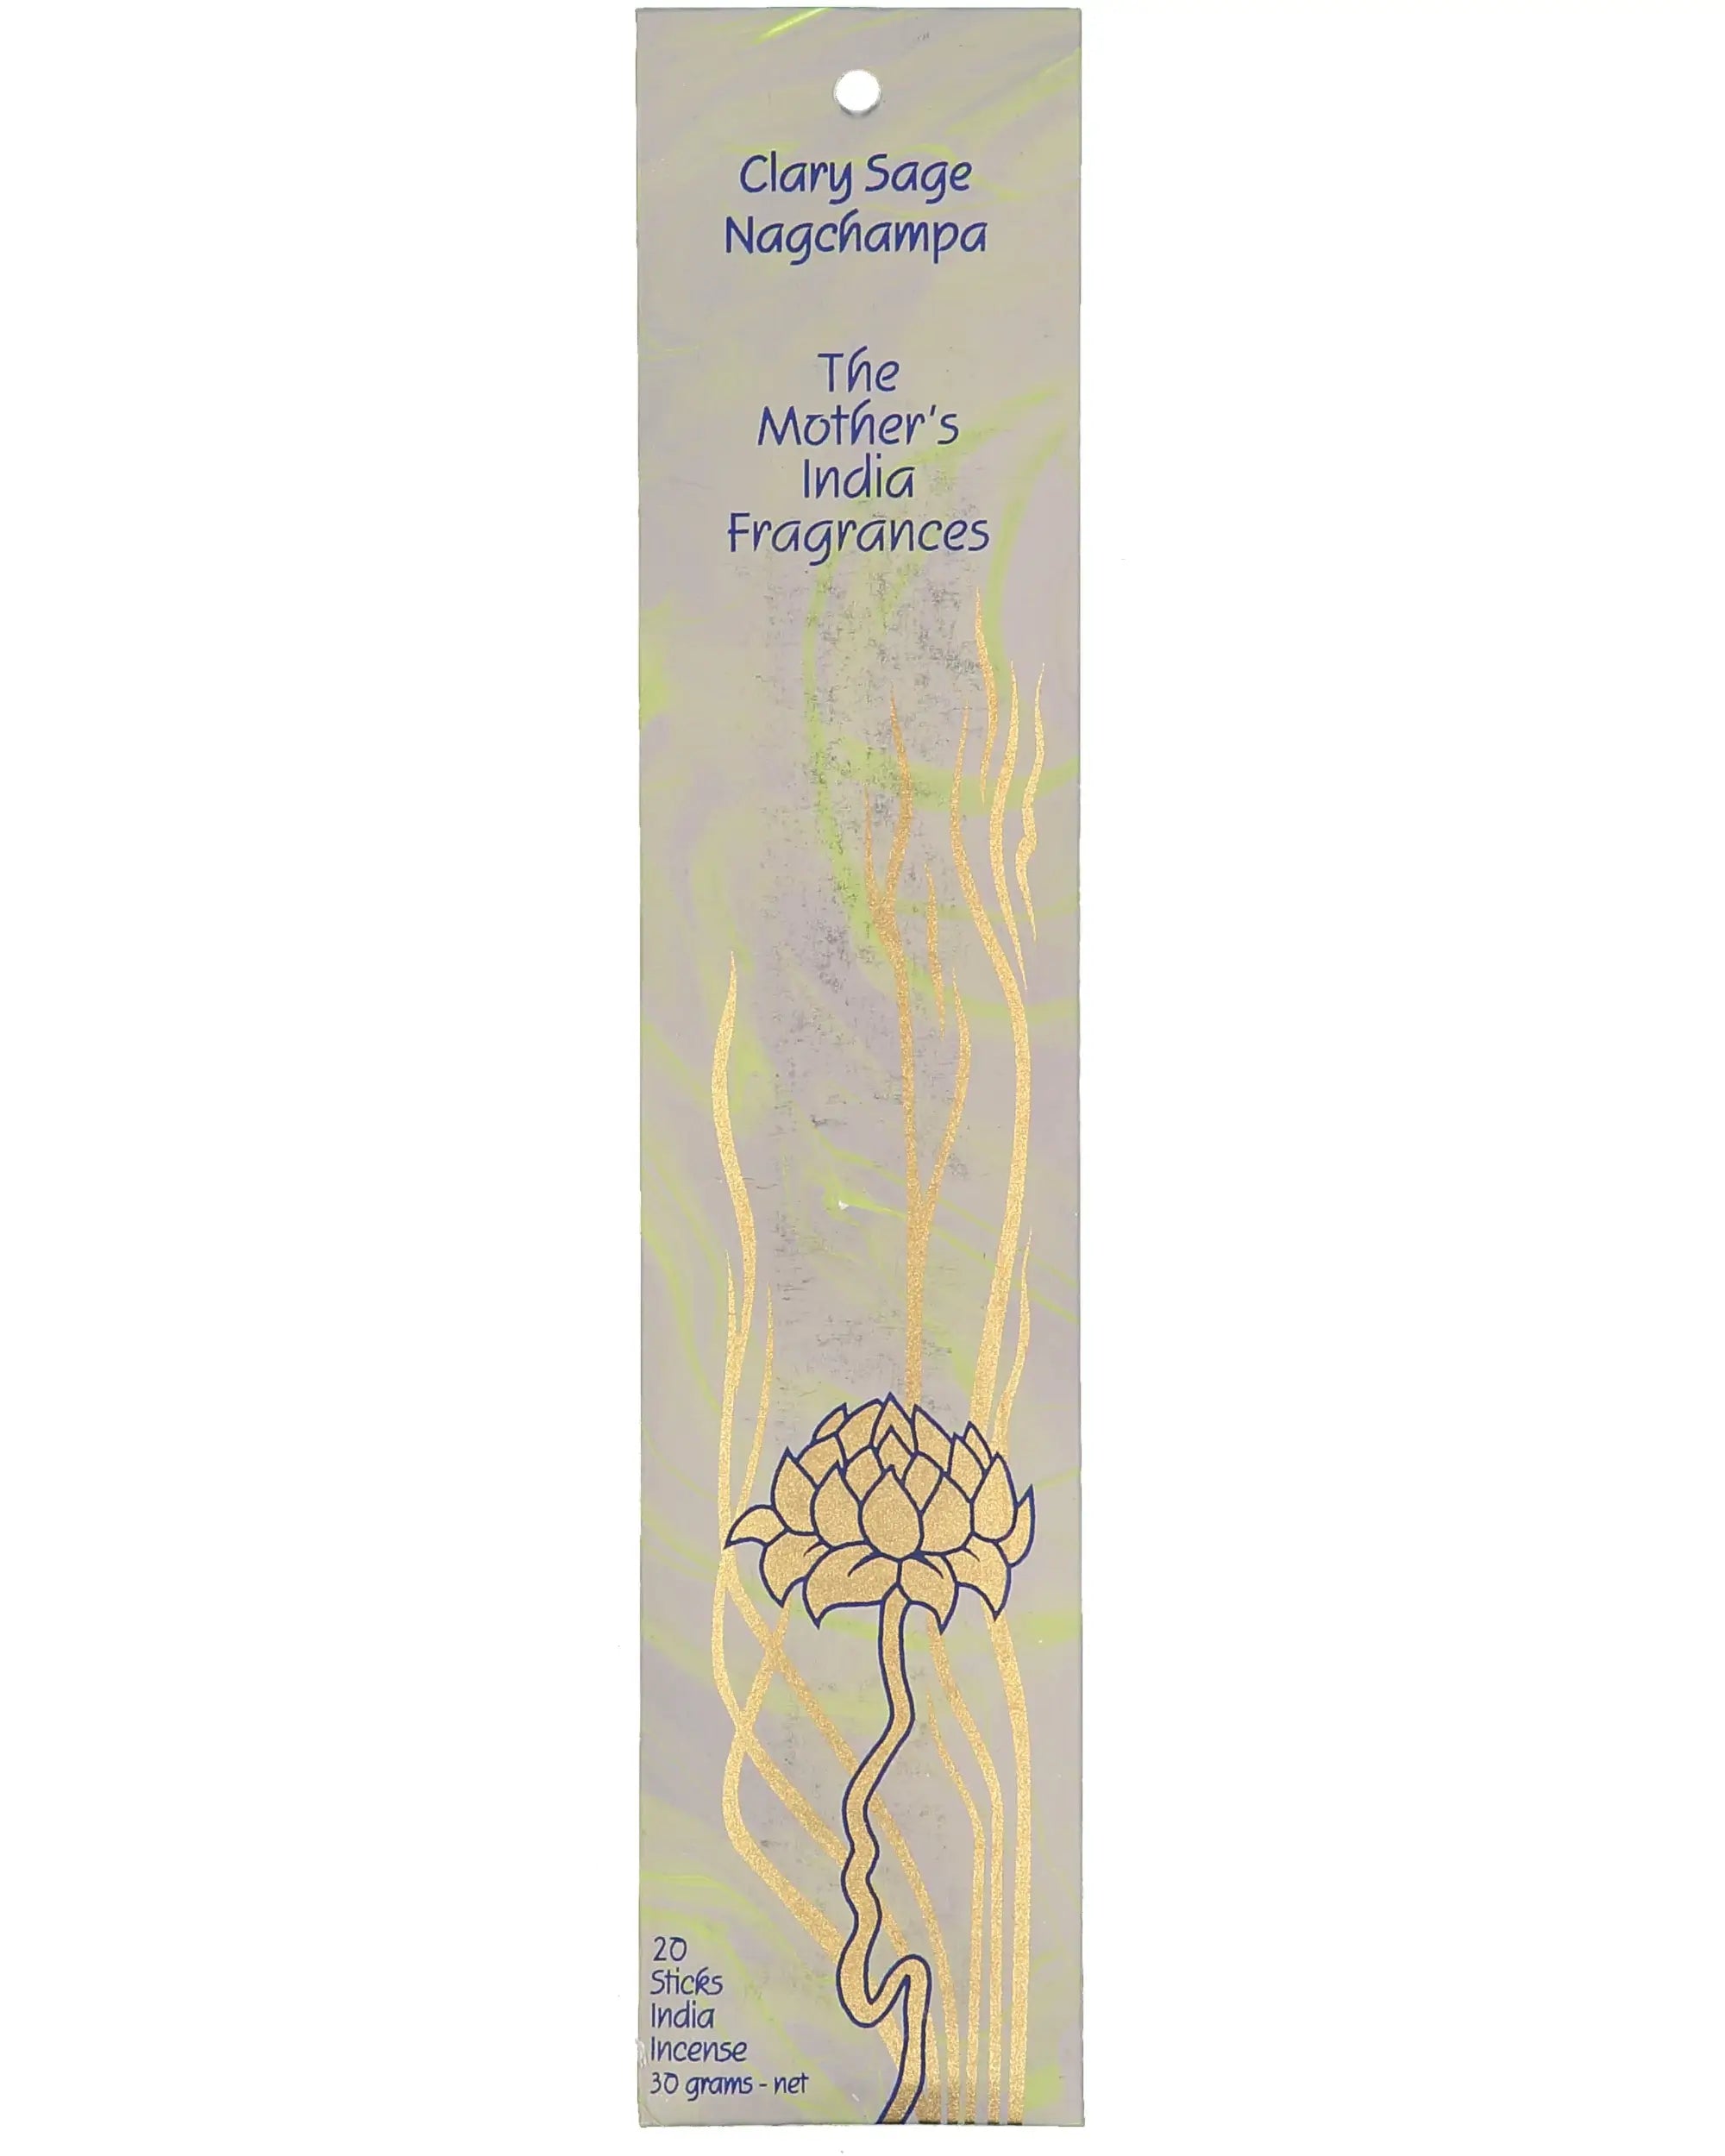 Clary Sage Nagchampa Real Incense by The Mother's India Fragrances Tantrika Australia